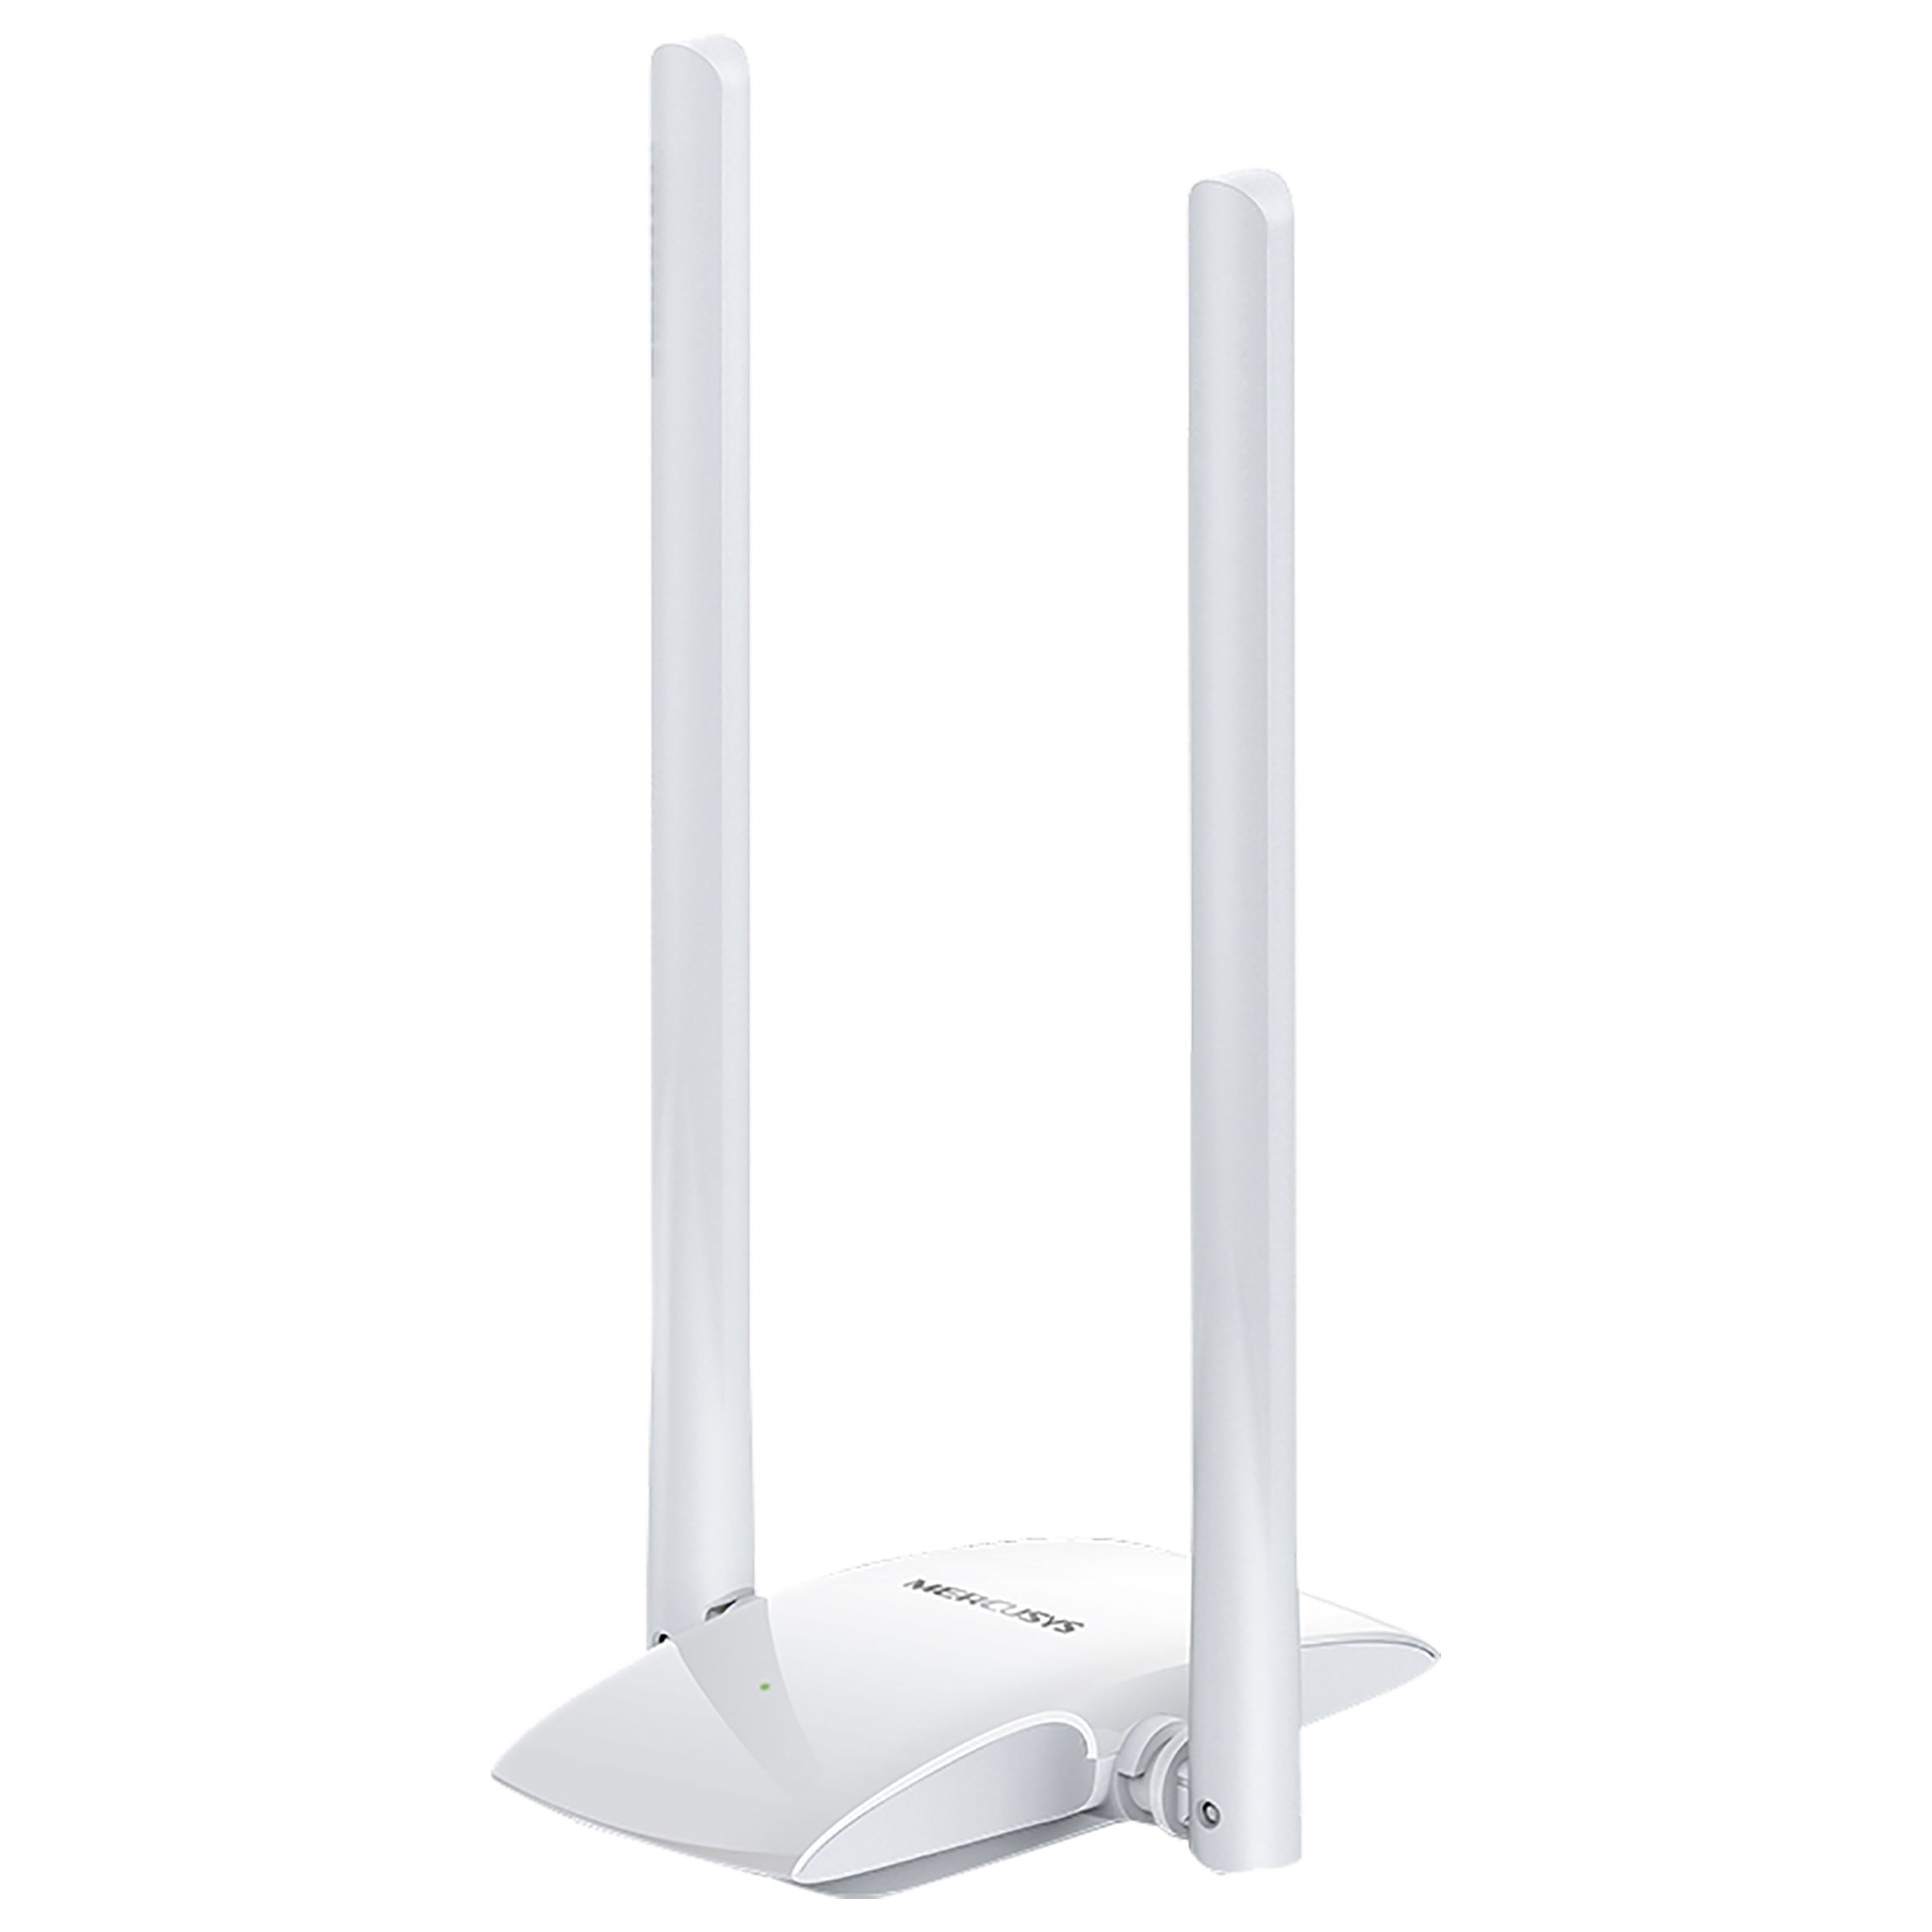 Mercusys MW300UH-M 300 Mbps Network Adapter (2 Antennas, White)_1